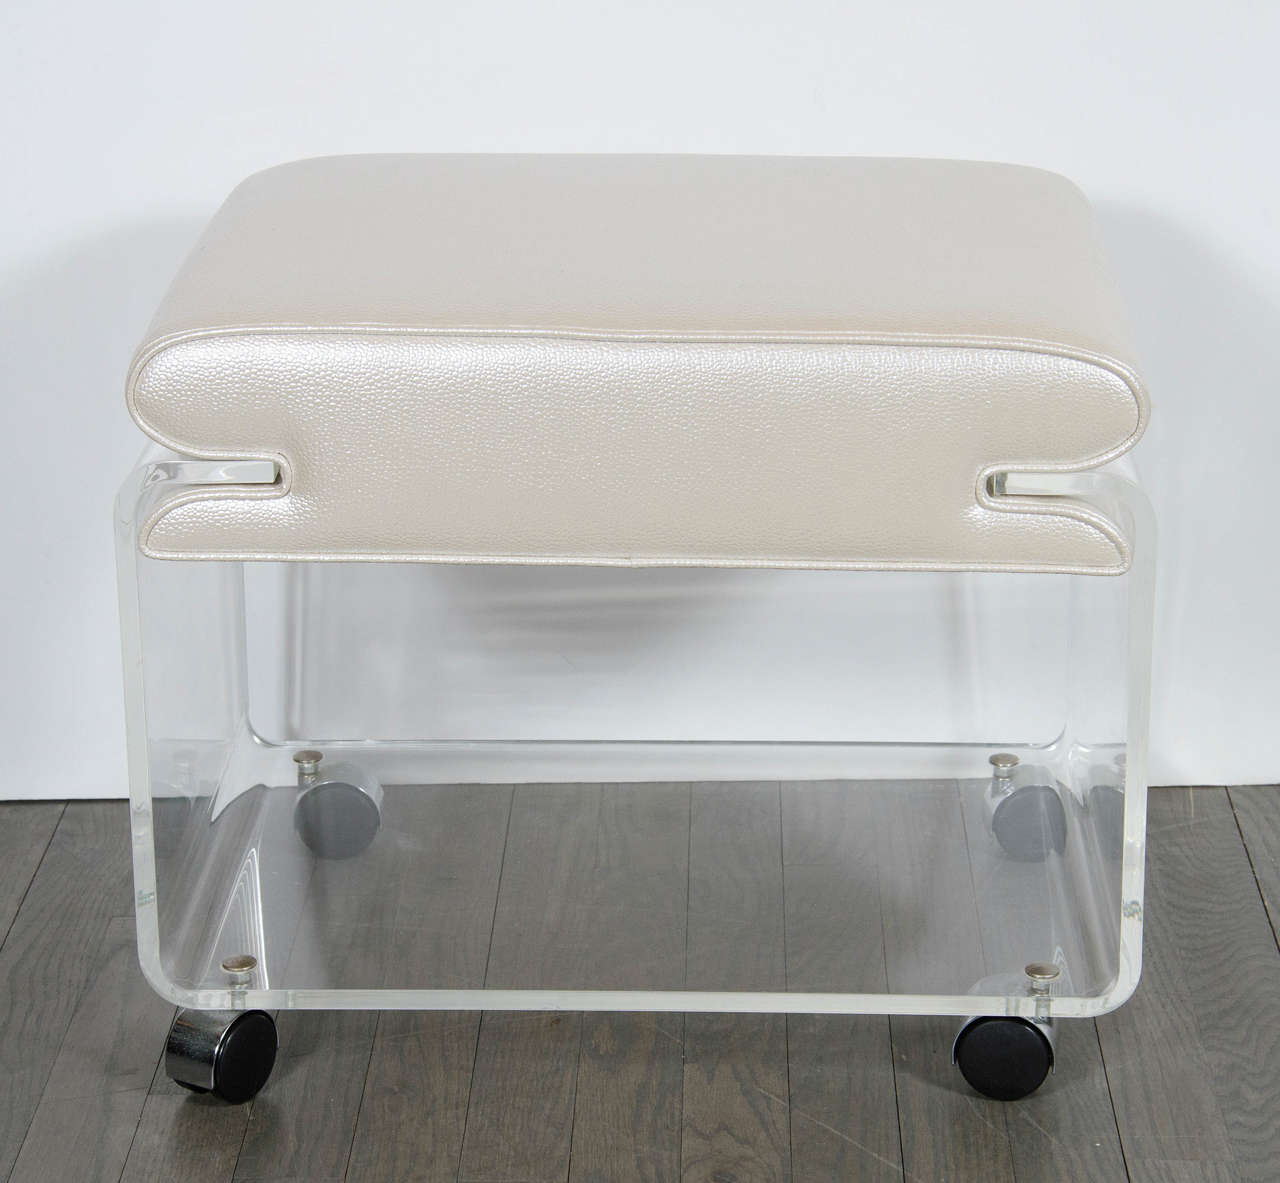 This chic Mid-Century Modernist enclosed waterfall form Lucite stool features an open cube-like form on castors with chrome covers and a comfortable seat newly upholstered in faux oyster shagreen that rests between the open ended Lucite side